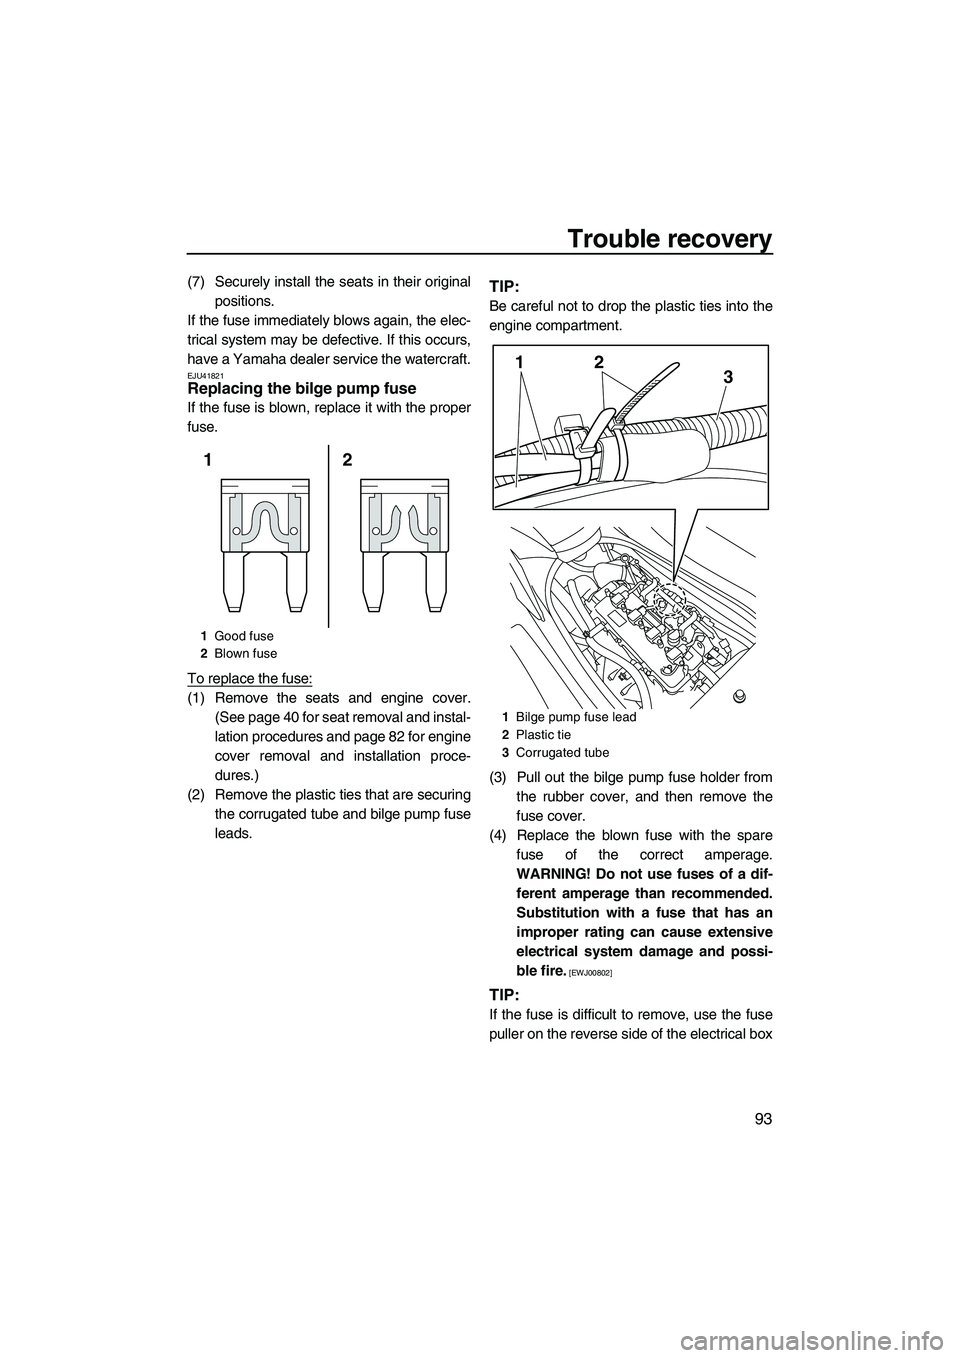 YAMAHA FZR 2013  Owners Manual Trouble recovery
93
(7) Securely install the seats in their originalpositions.
If the fuse immediately blows again, the elec-
trical system may be defective. If this occurs,
have a Yamaha dealer servi